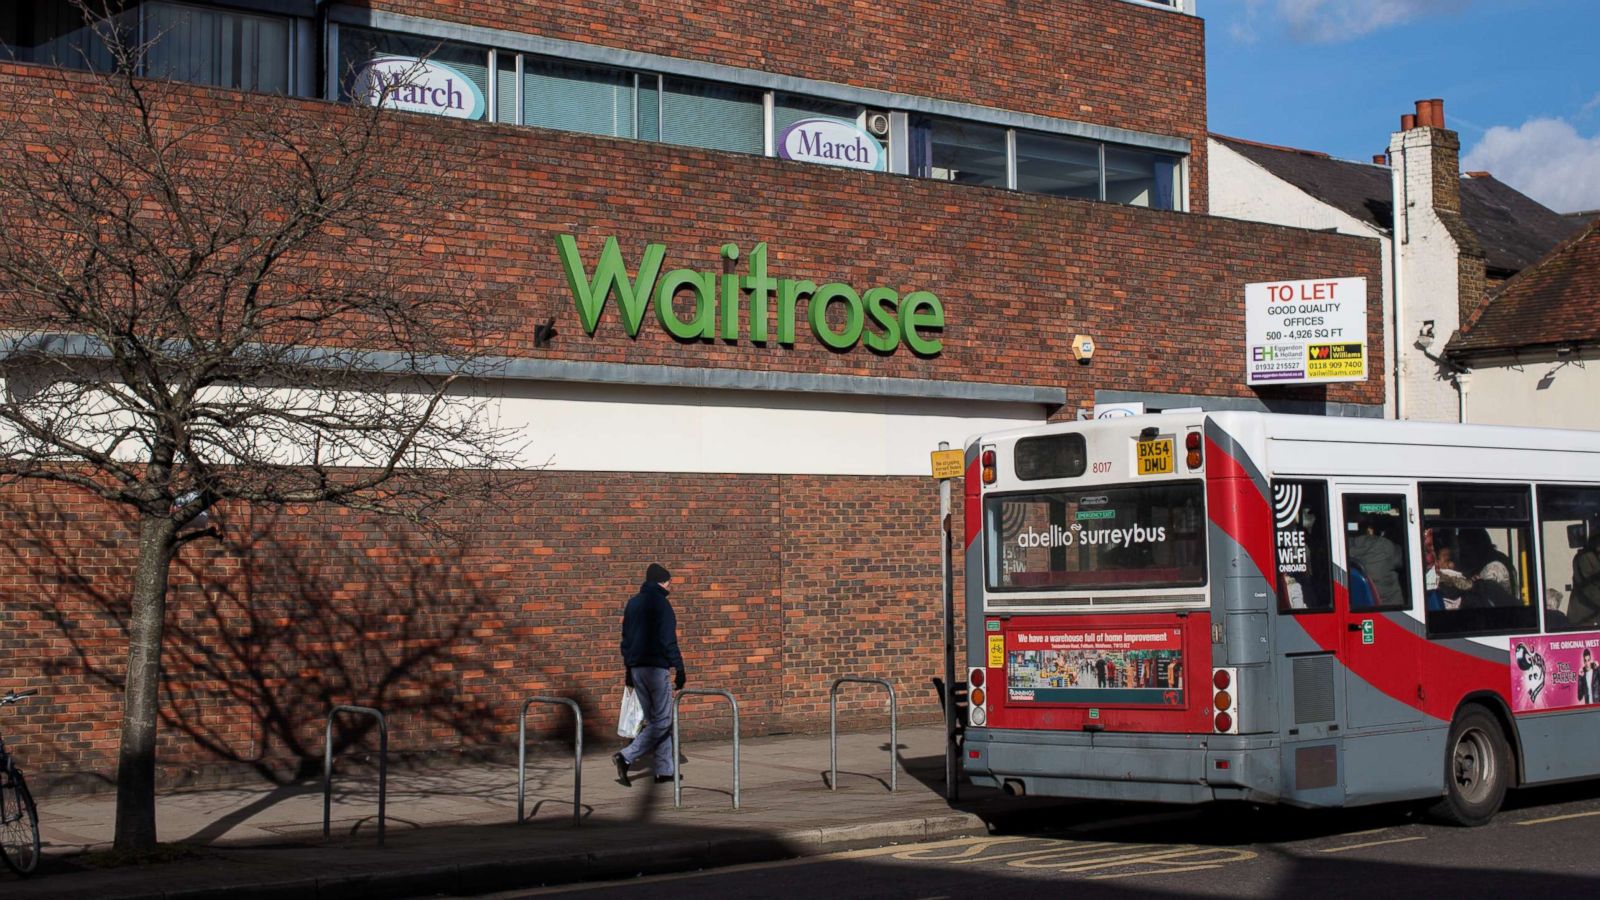 PHOTO: A Surrey local bus stands at a bus stop in front of a Waitrose supermarket, Feb. 12, 2018 in Weybridge, England.